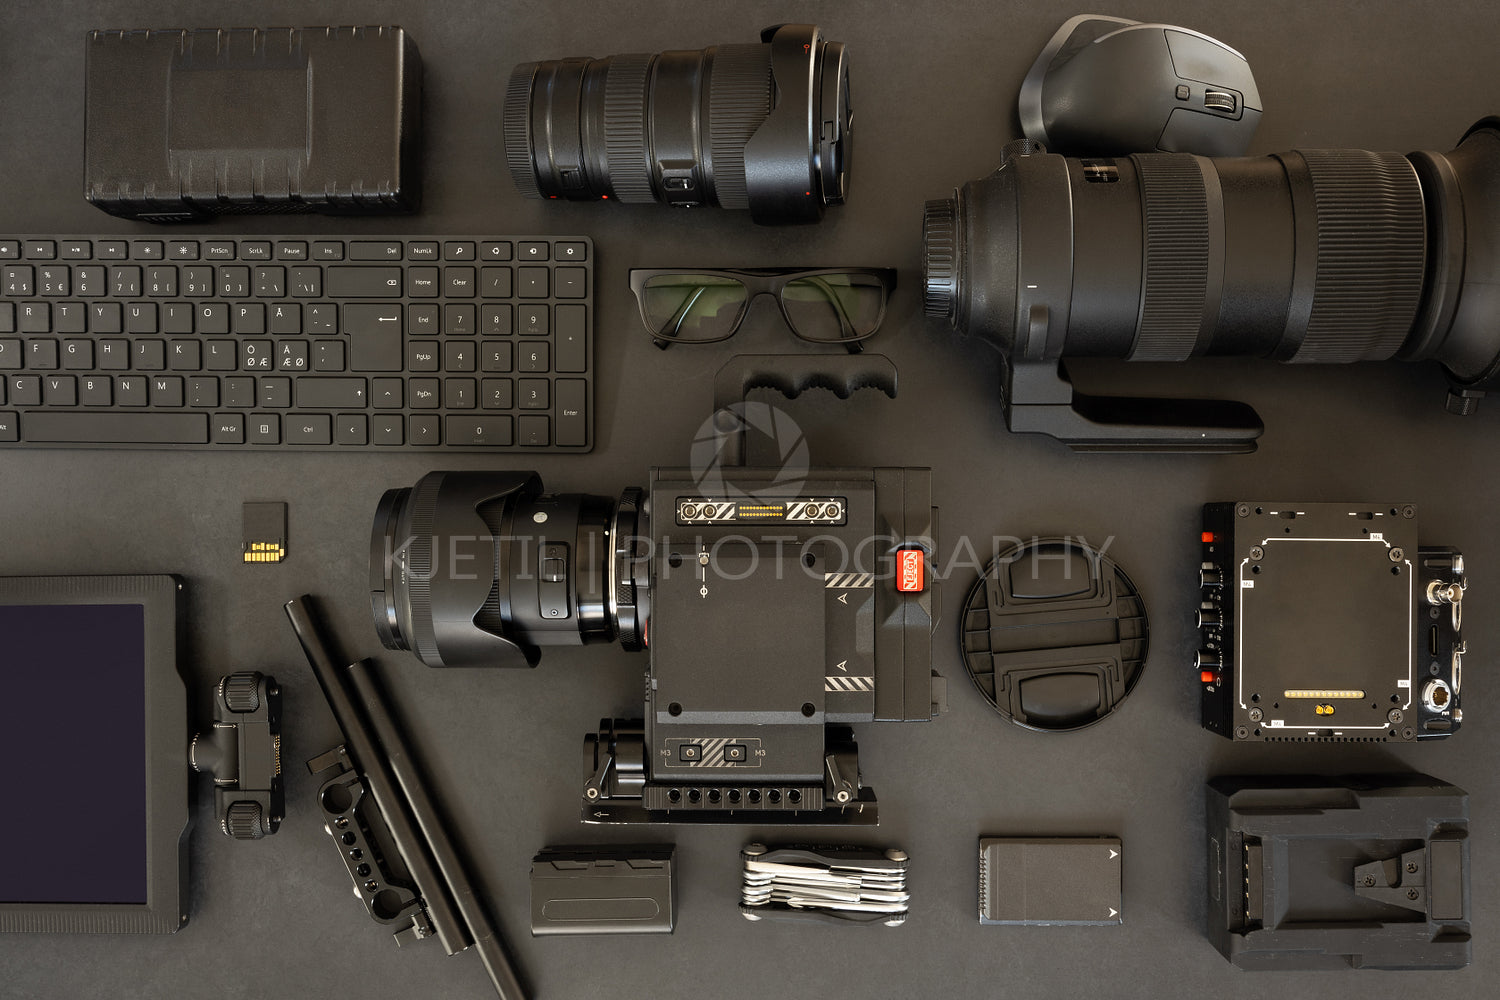 Flat lay of filming equipment with keyboard and eyeglasses on table